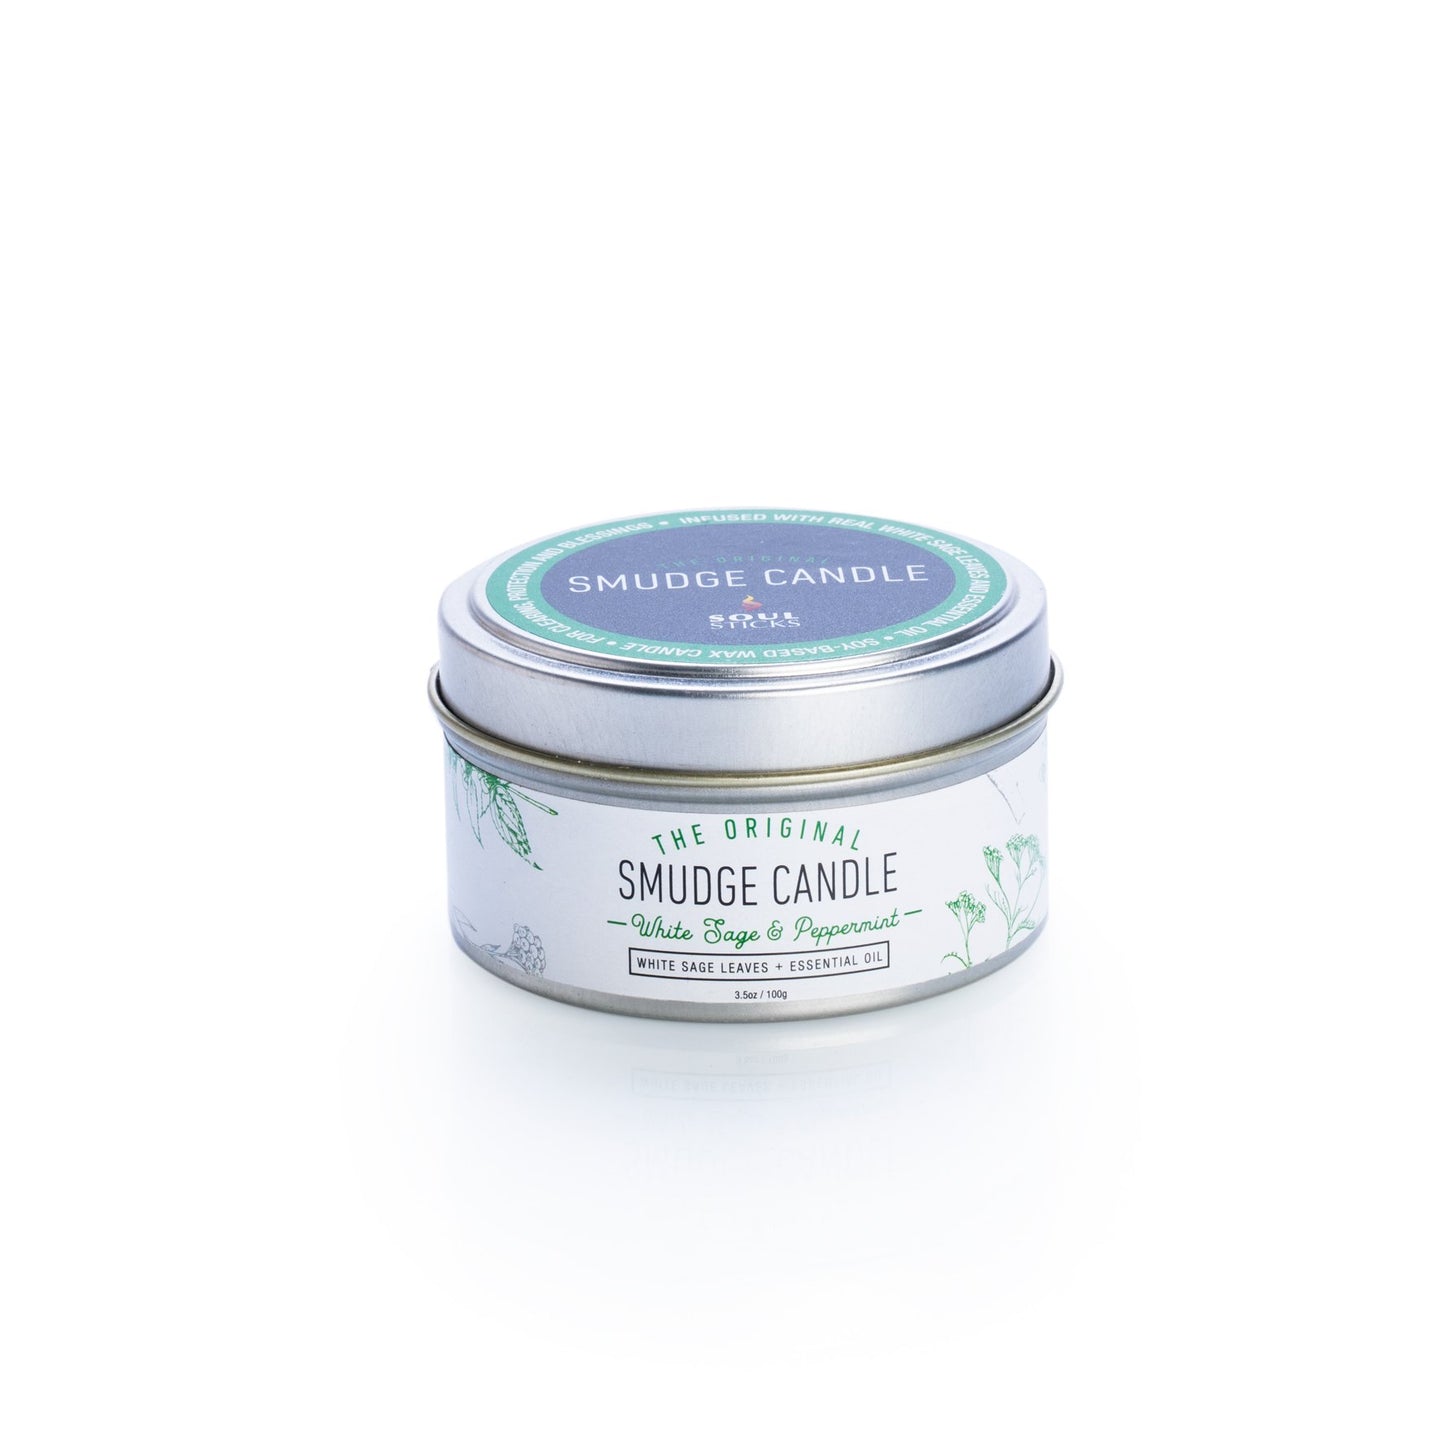 Smudge candle - white sage & peppermint - Rivendell Shop